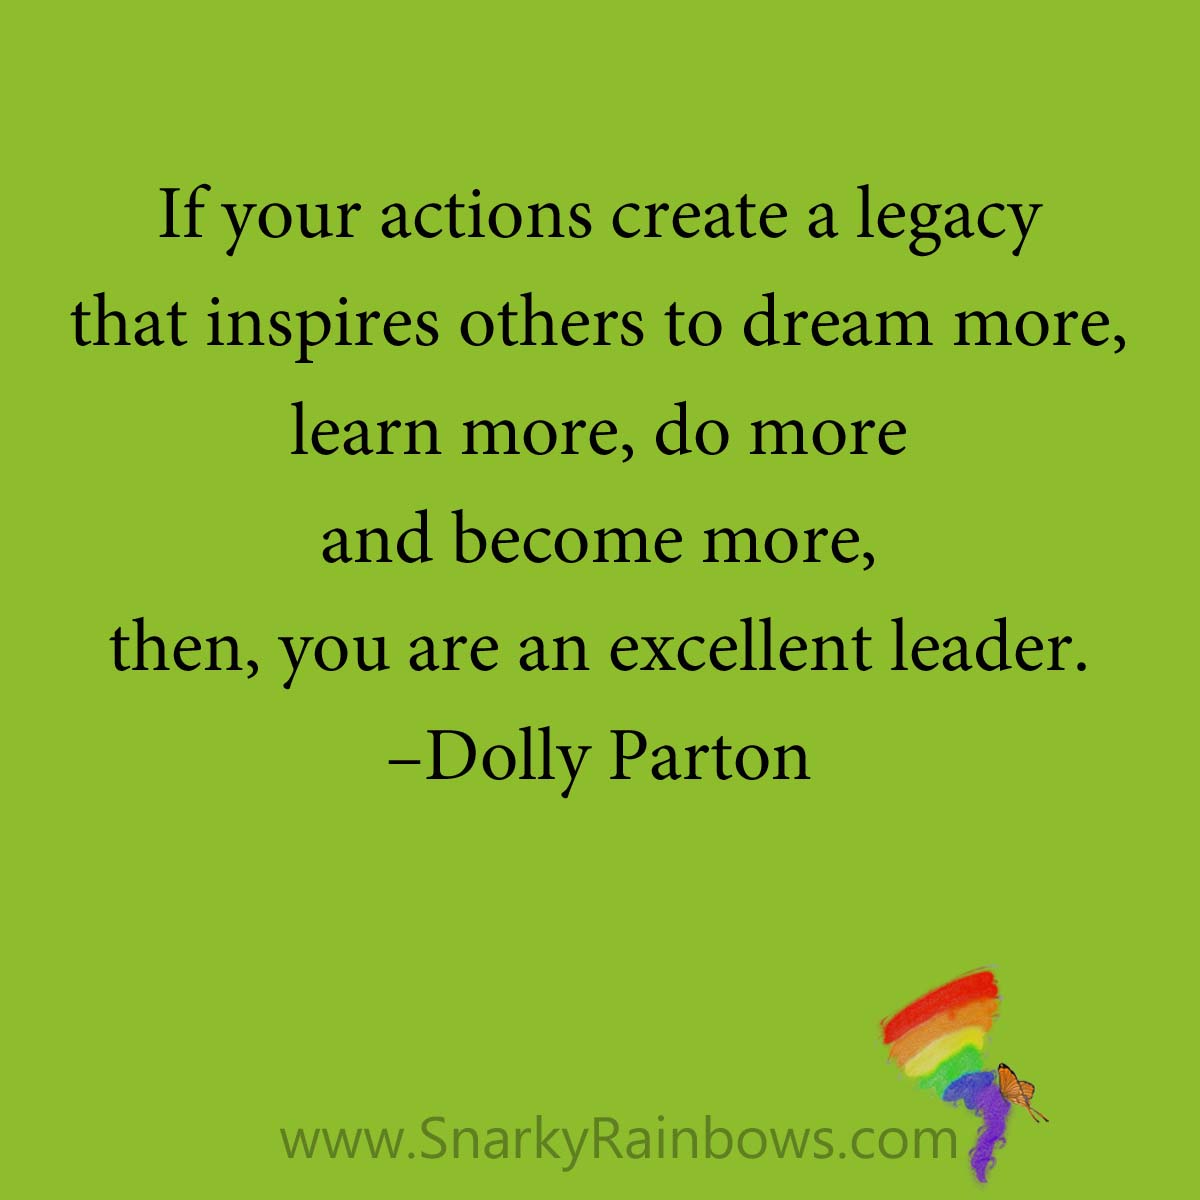 quote - dolly parton - create a legacy